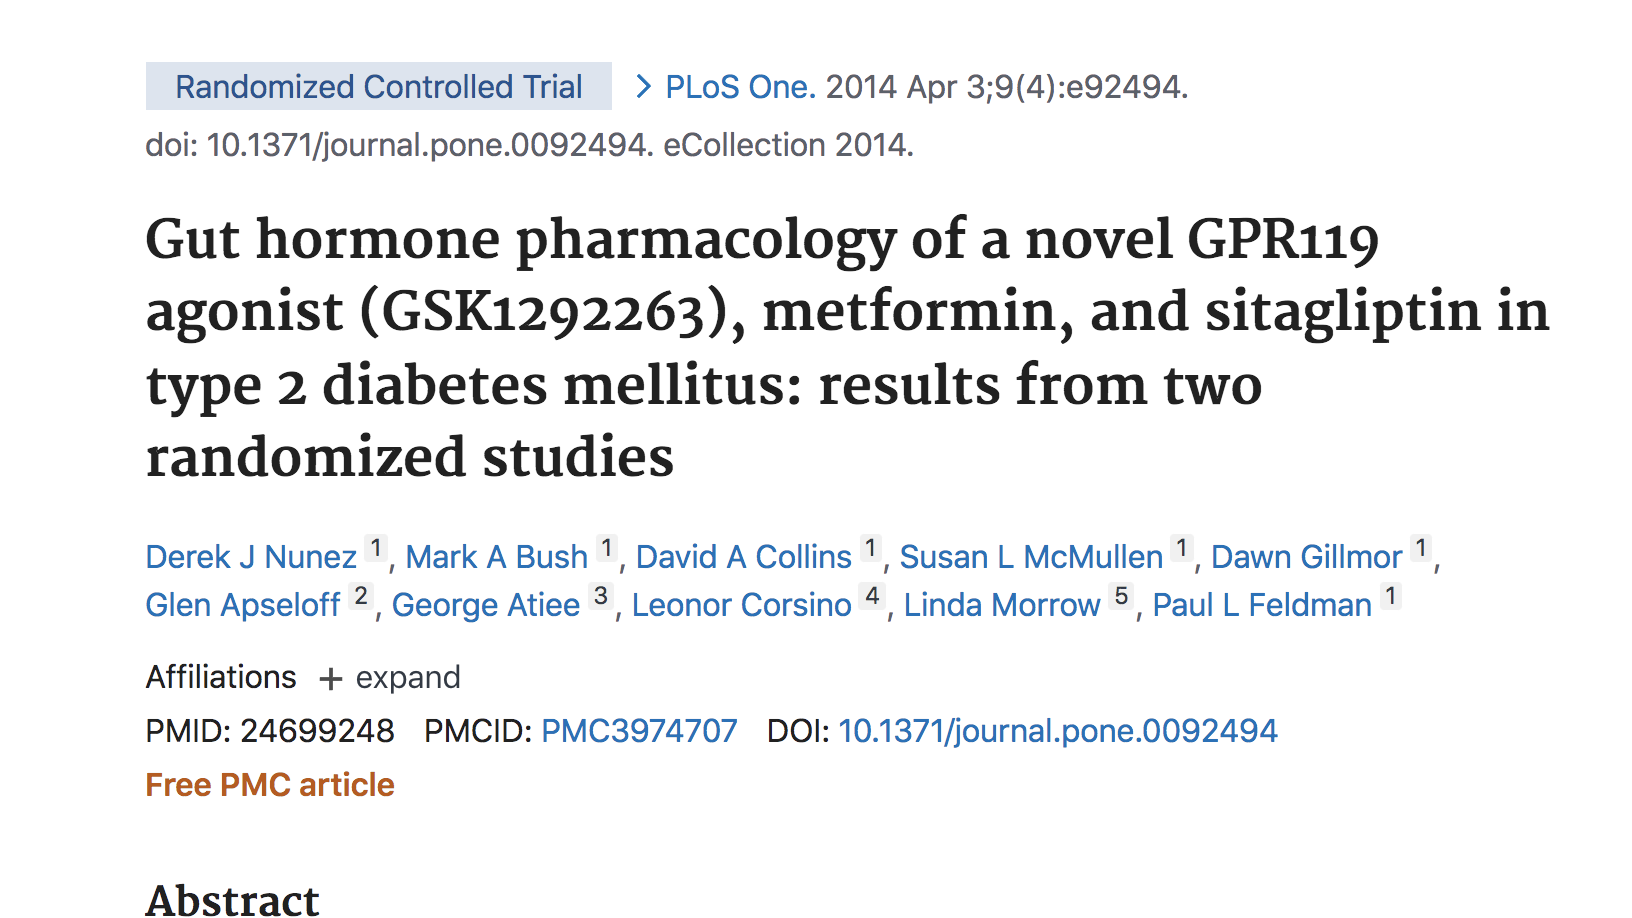 image of Gut hormone pharmacology of a novel GPR119 agonist (GSK1292263), metformin, and sitagliptin in type 2 diabetes mellitus: results from two randomized studies